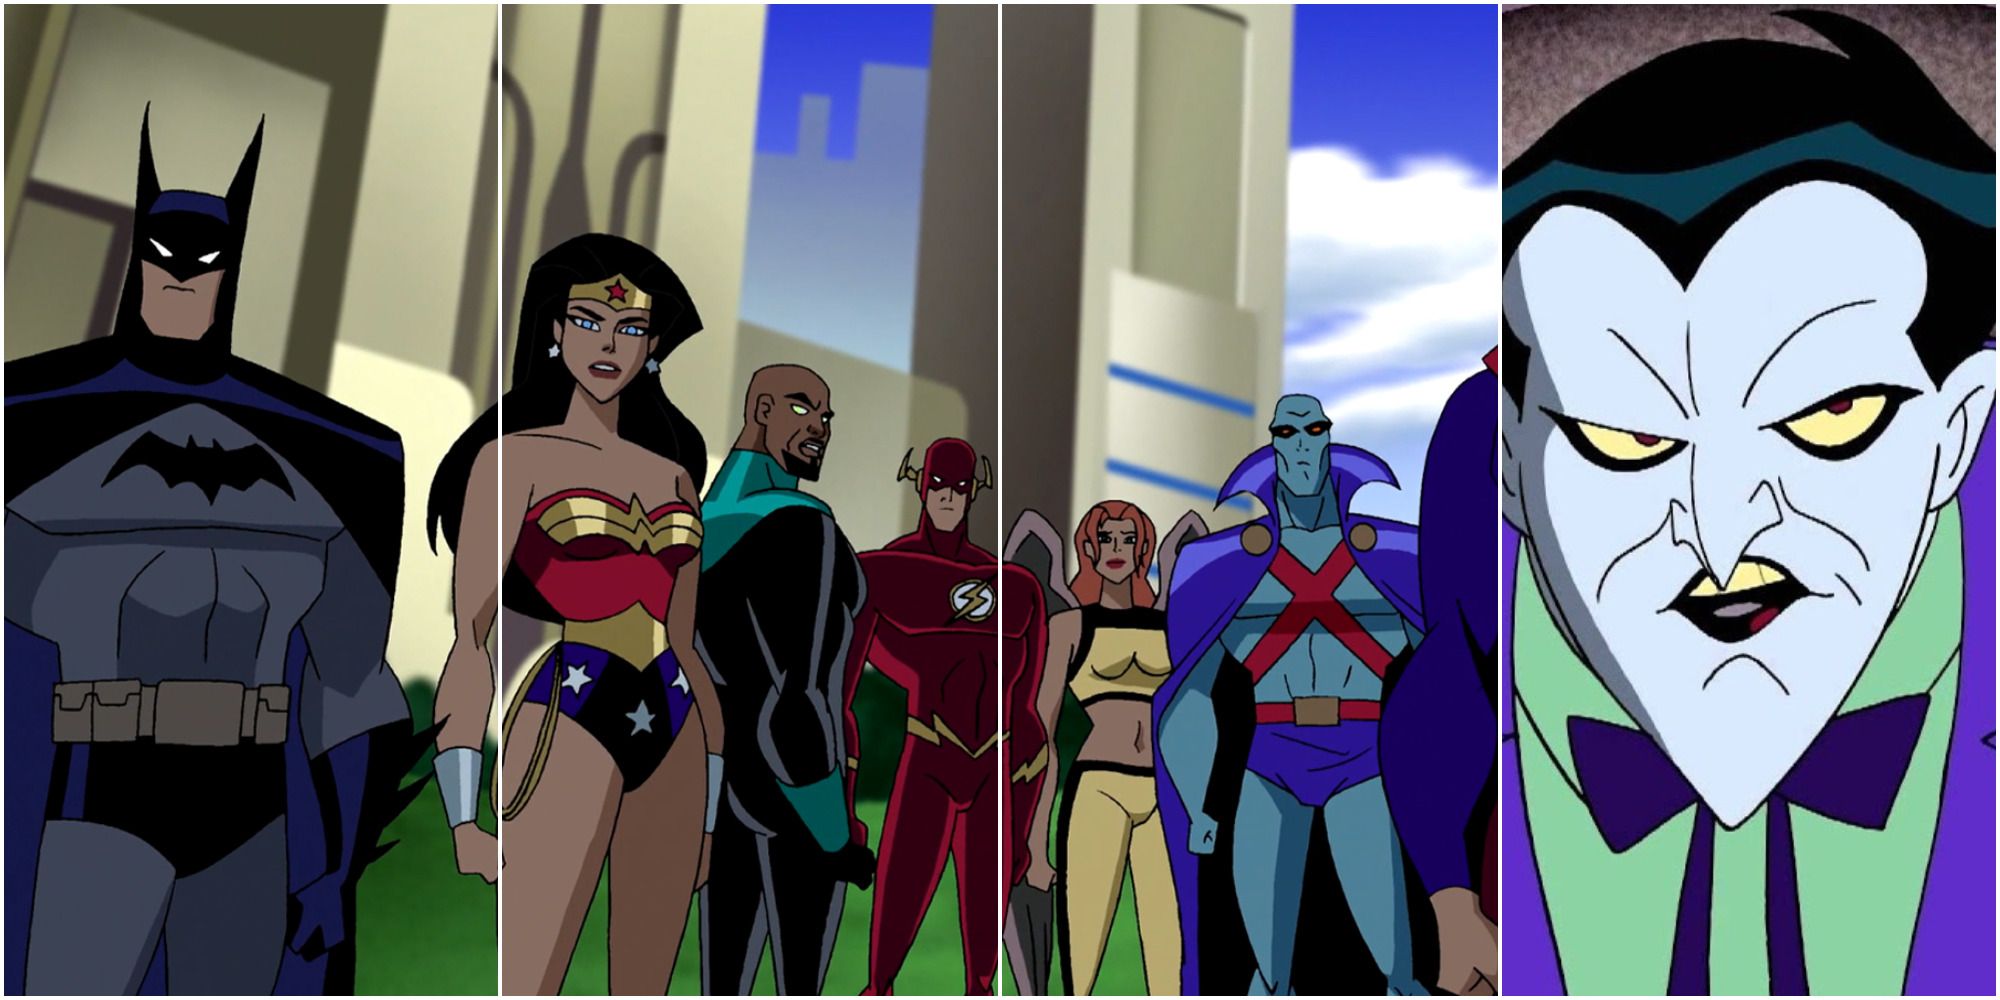 Cartoon Network's Justice League: 10 Best Episodes, Ranked According To IMDb